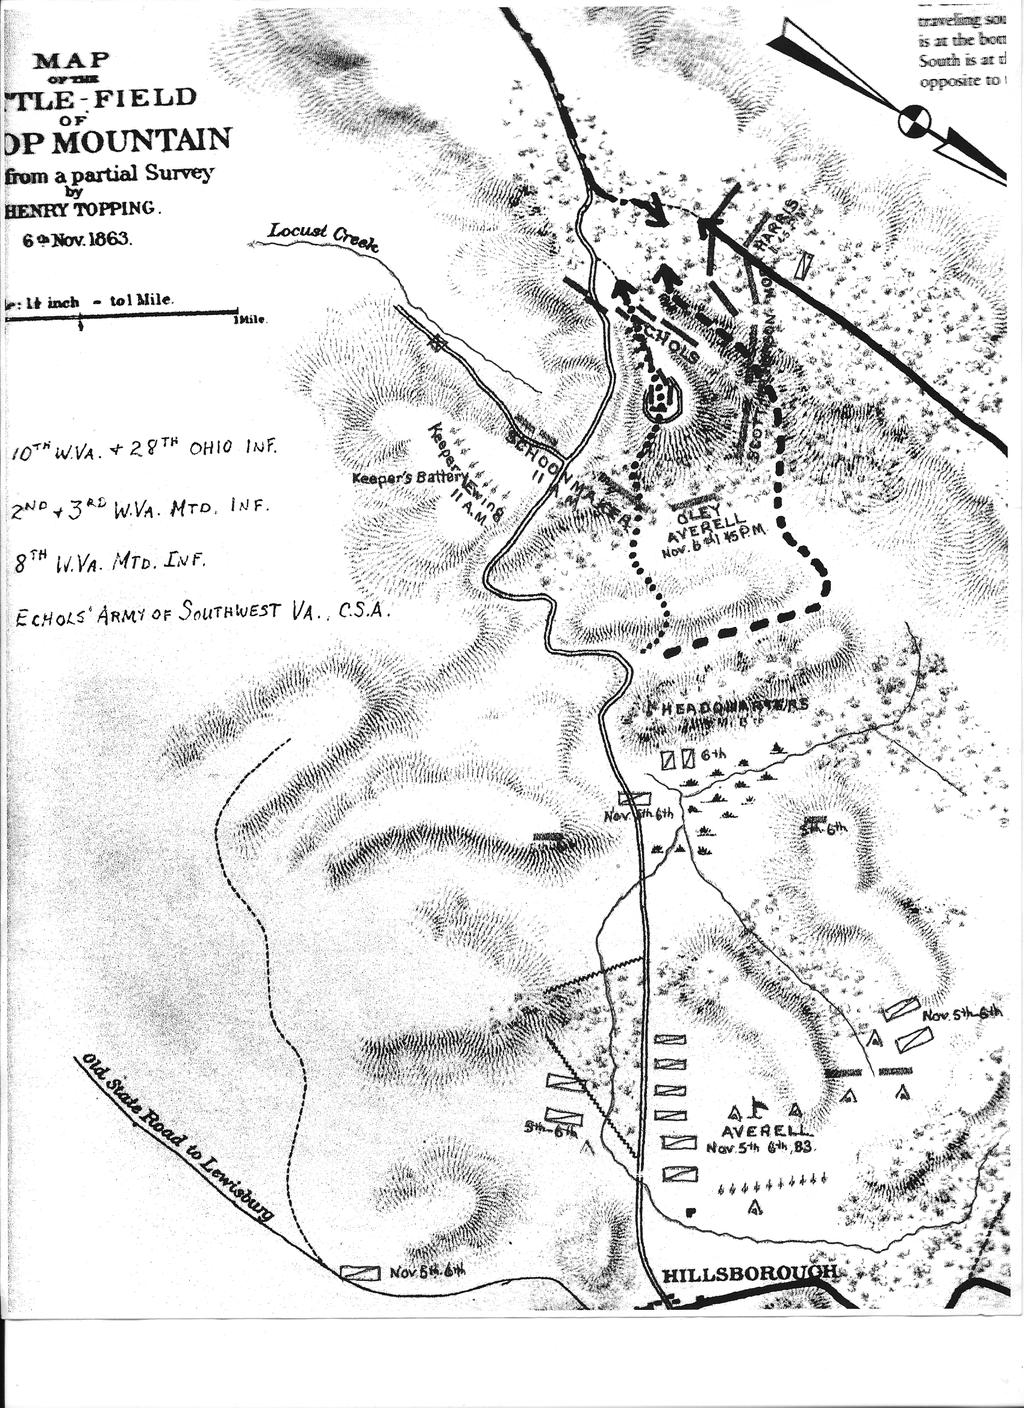 150th COMMEMORATIVE BATTLE OF DROOP MOUNTAIN Aug 30 sept 1 Droop mountain battlefield state park MAP of the BATTLE